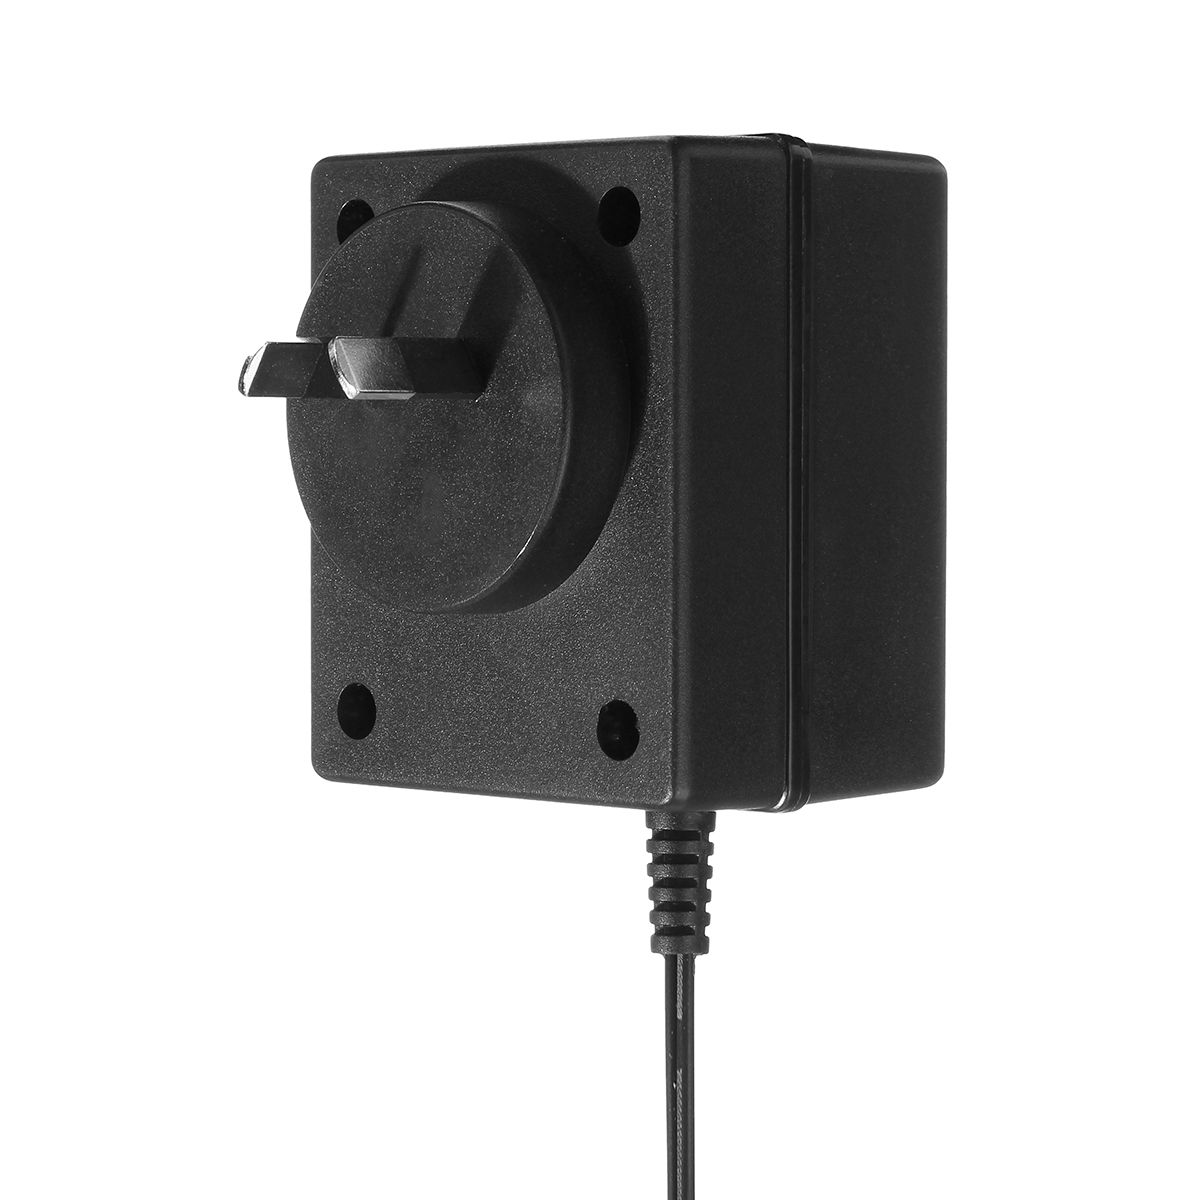 7m-Cable-AU-Plug-Adapter-for-Rring-Video-Doorbell-230V-to-18V-500ma-1587262